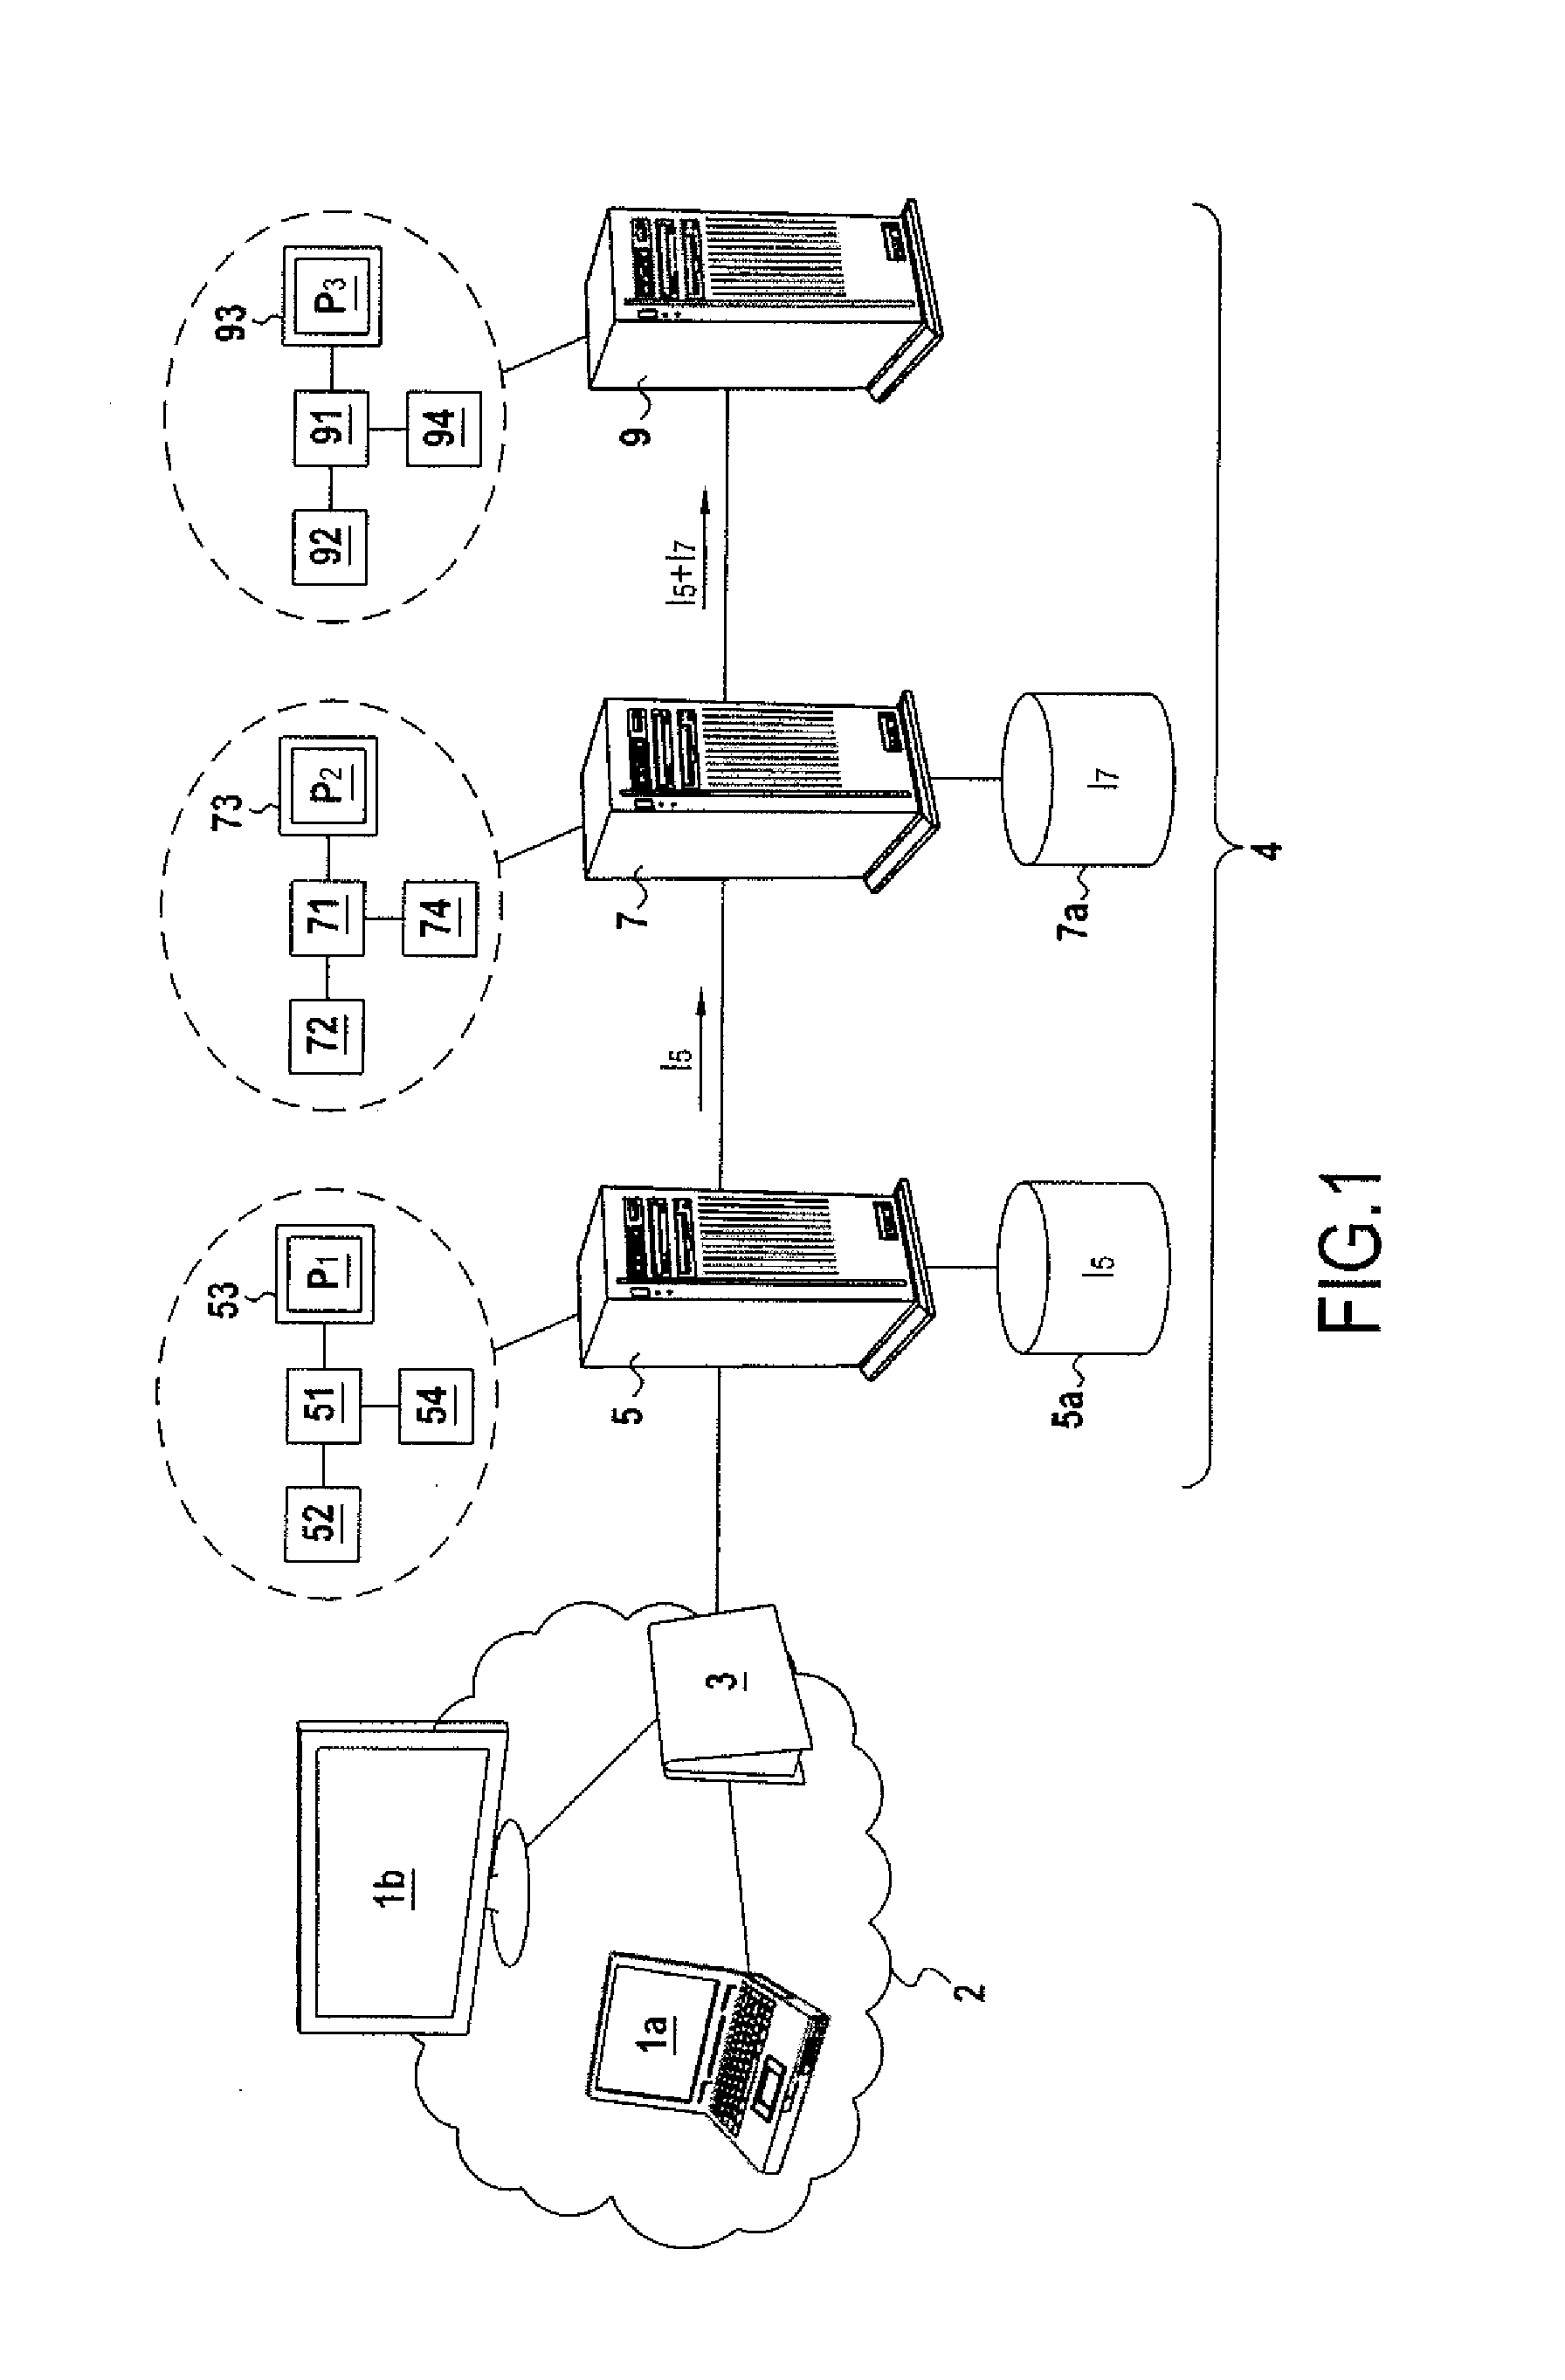 Method for Obtaining Information from a Local Terminal Environment